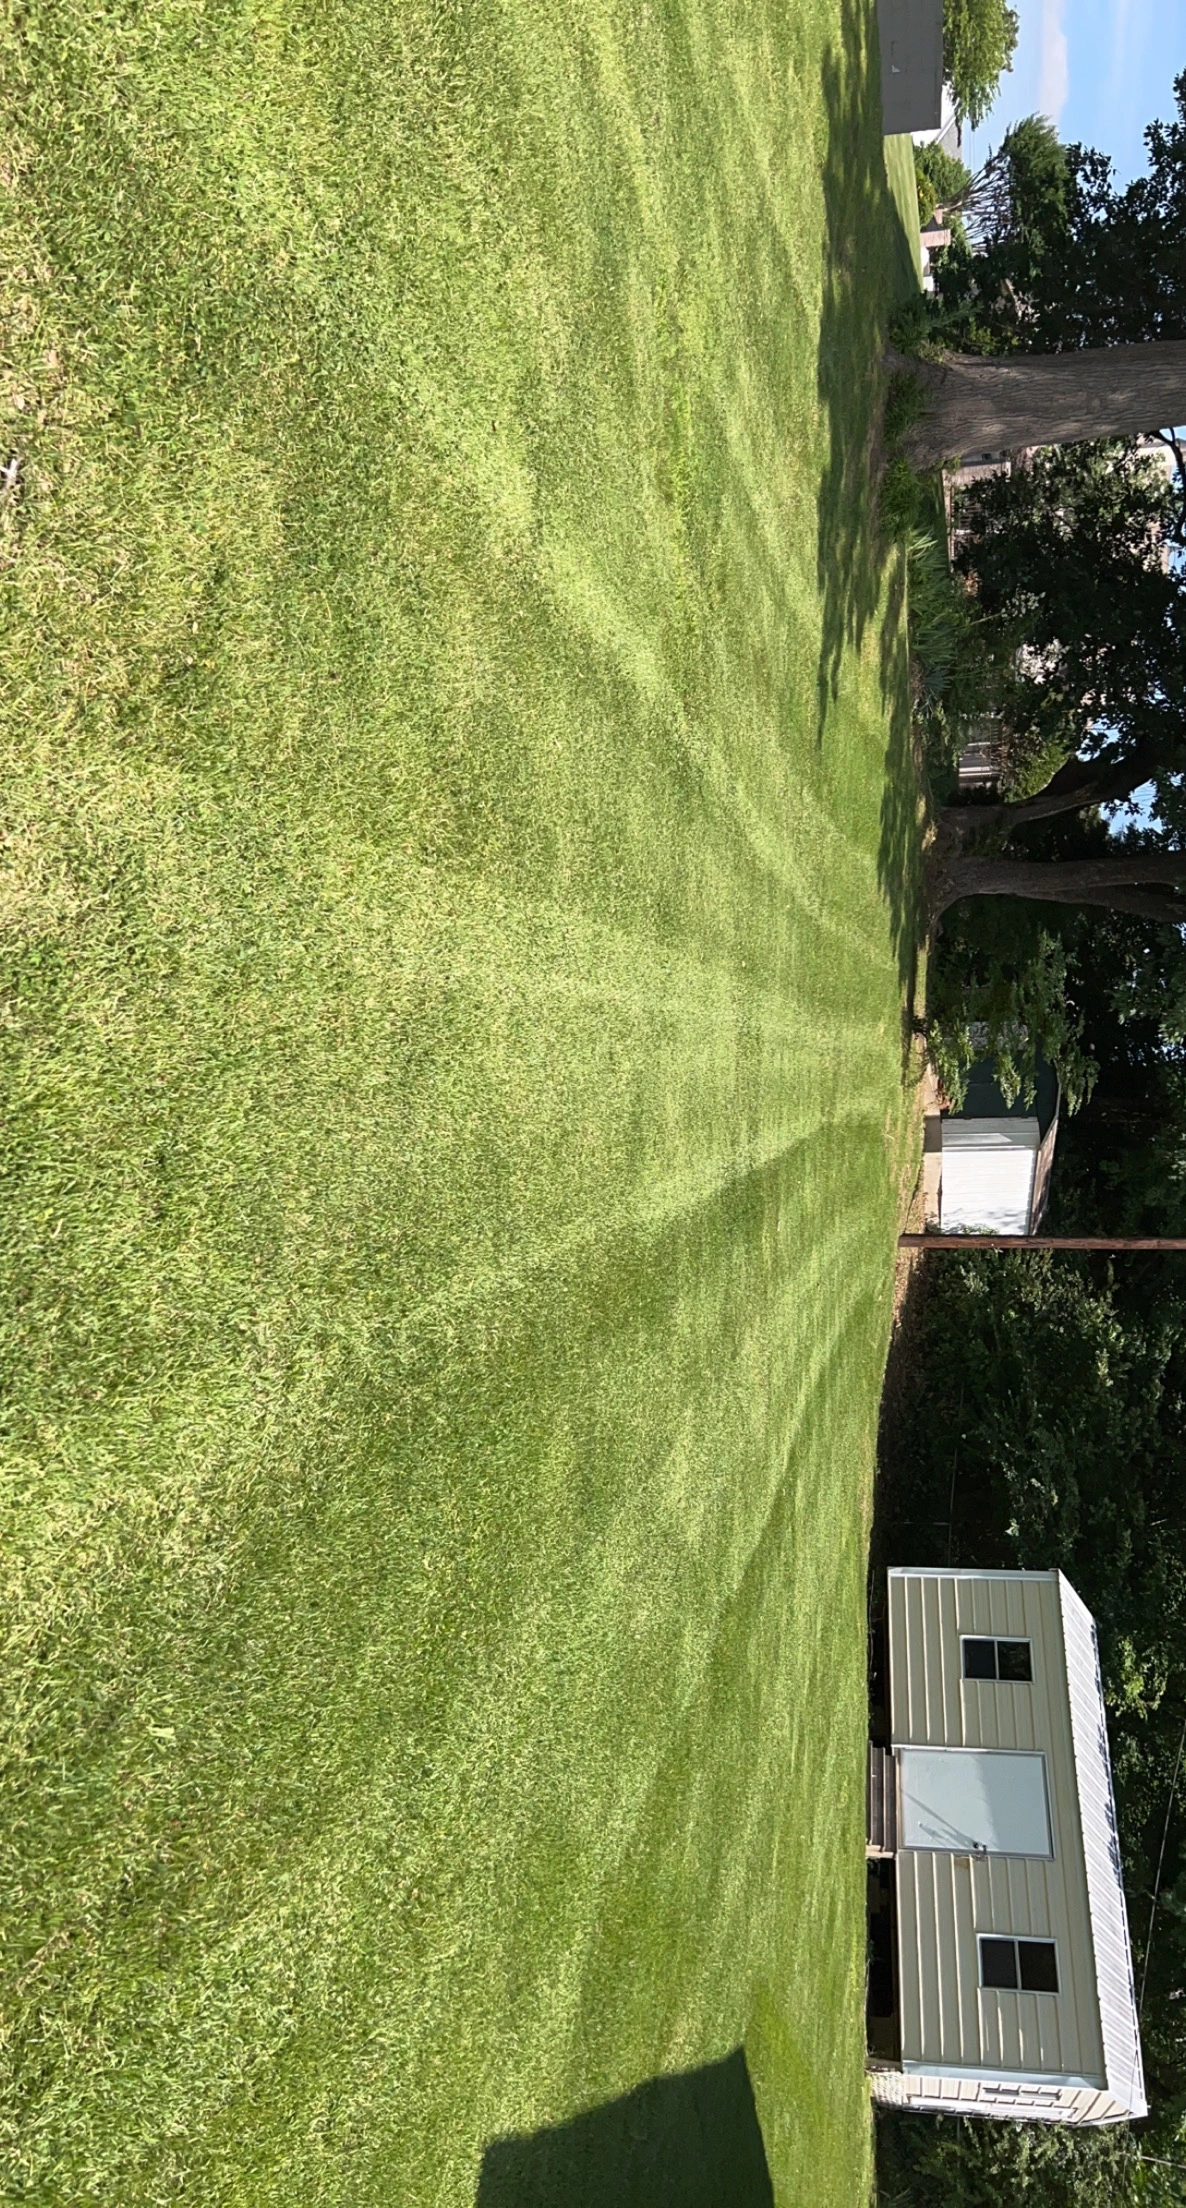 Front yard of home receiving lawn mowing and maintenance from Wakefield L&L.